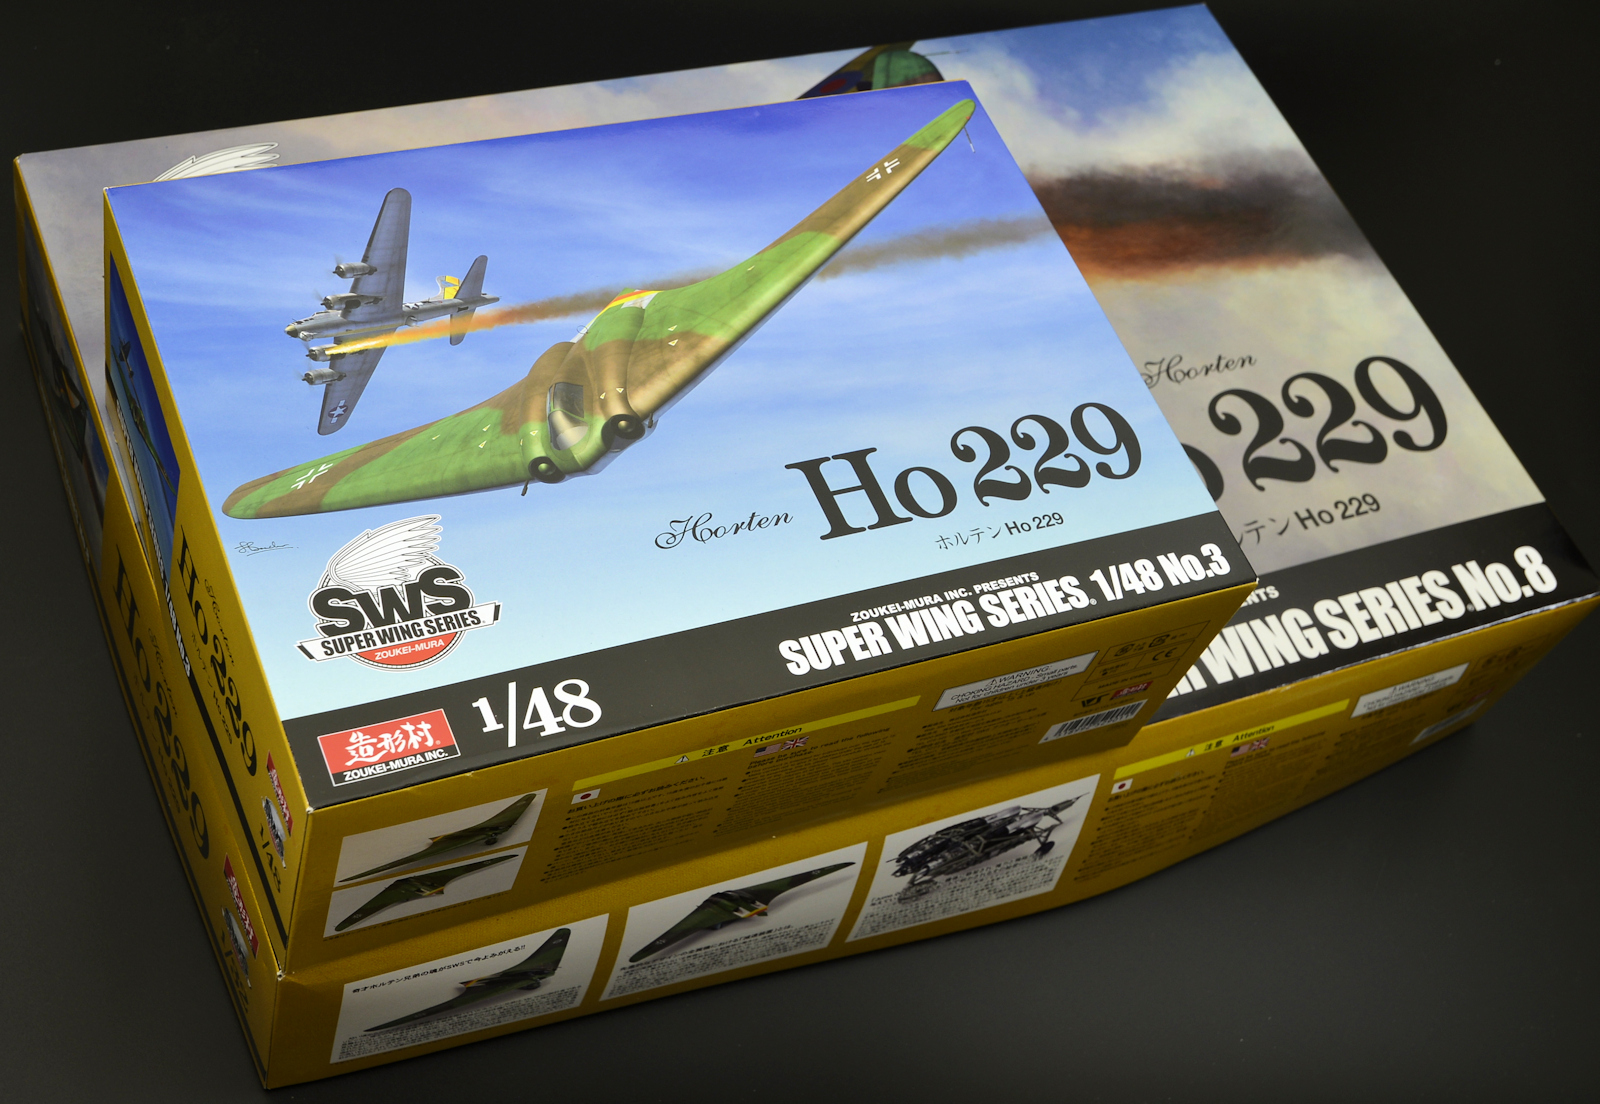 The Modelling News Gary S Build Of Zoukei Mura S 48th Scale Ho 229 Horten Pt I Getting It All Together